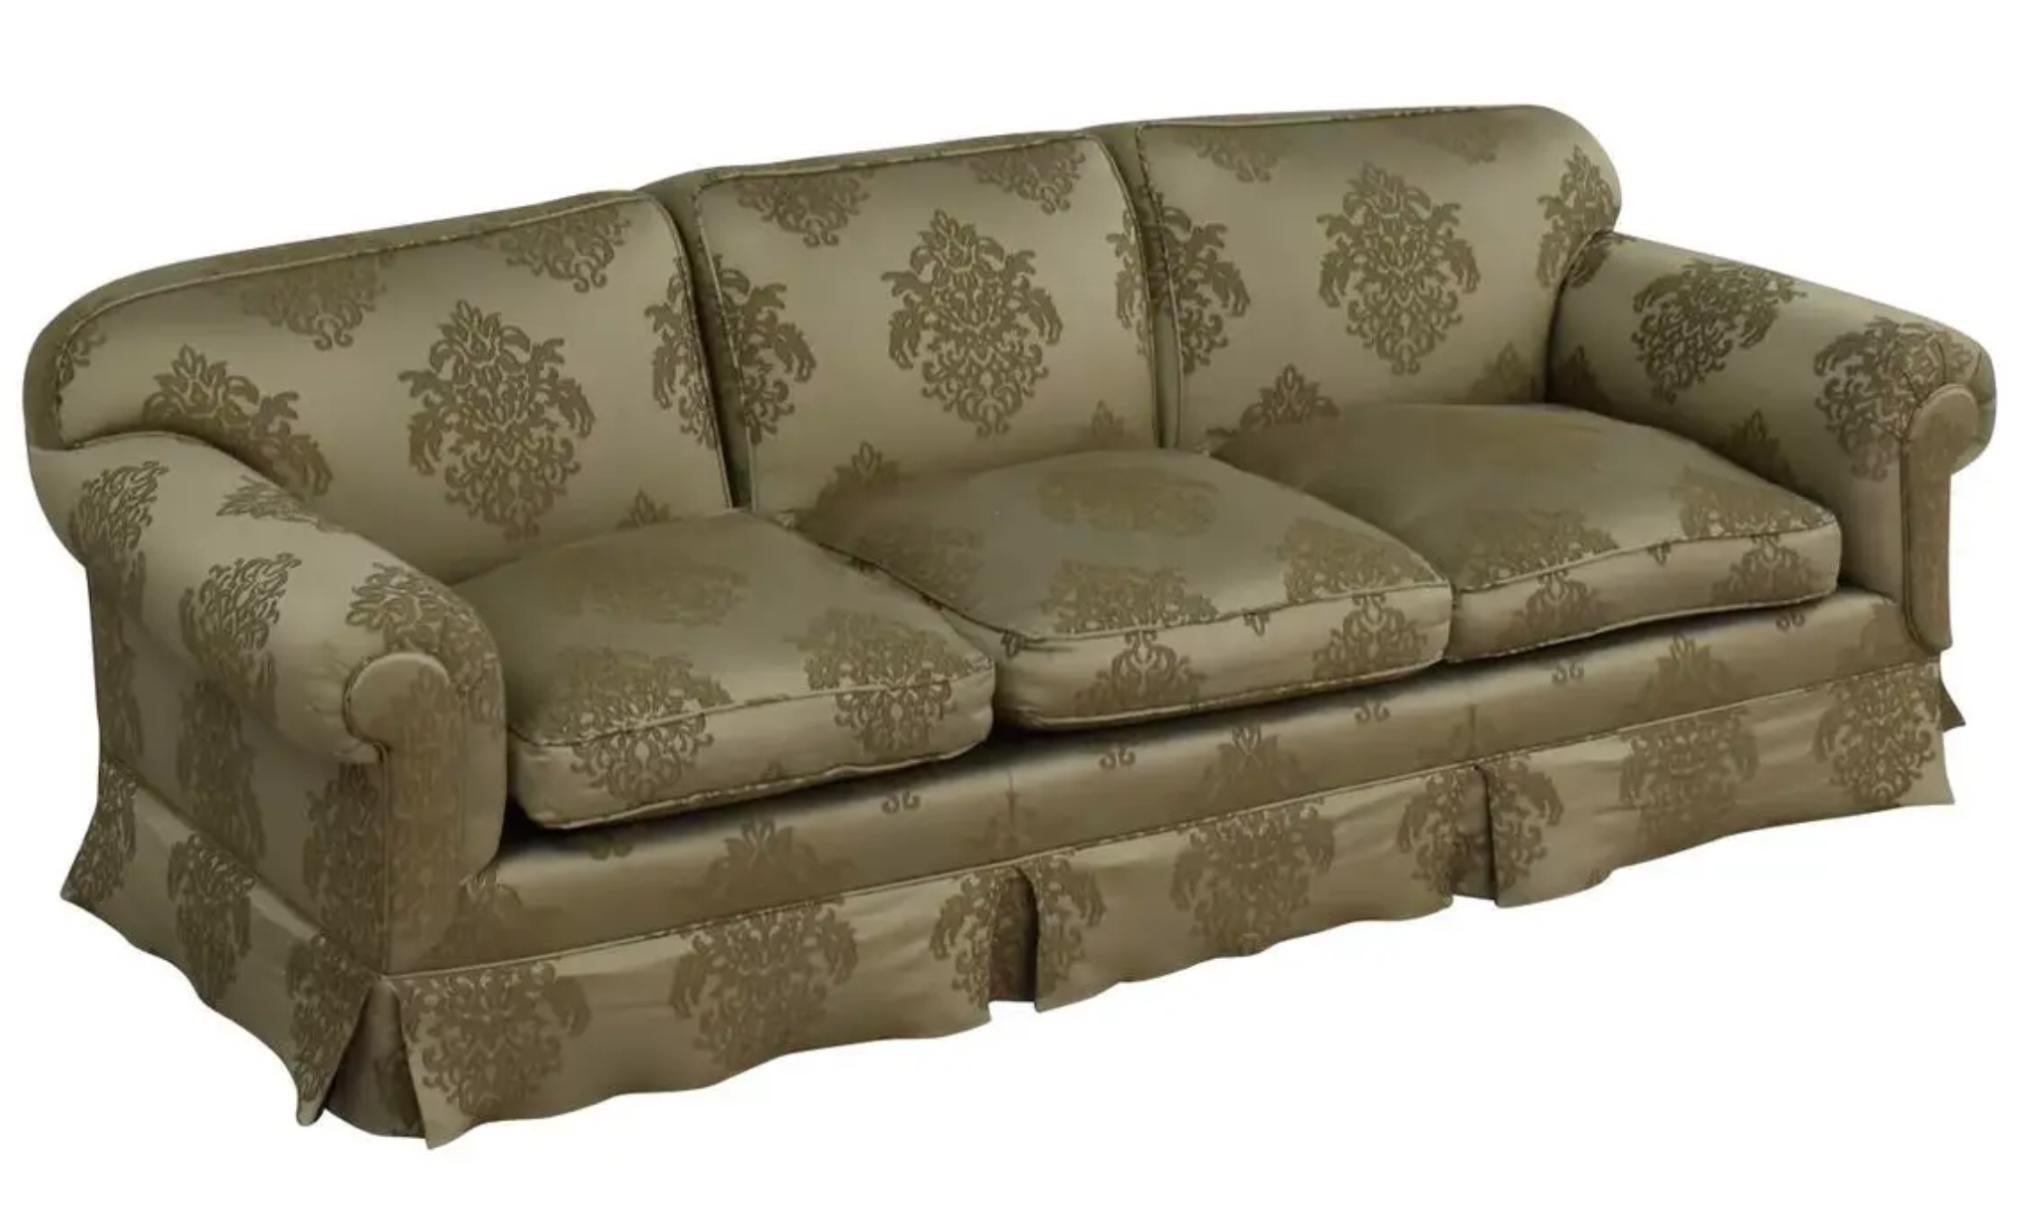 American Gregorius Pineo Damask Upholstered Olive Green Roll Arm Sofa Settee